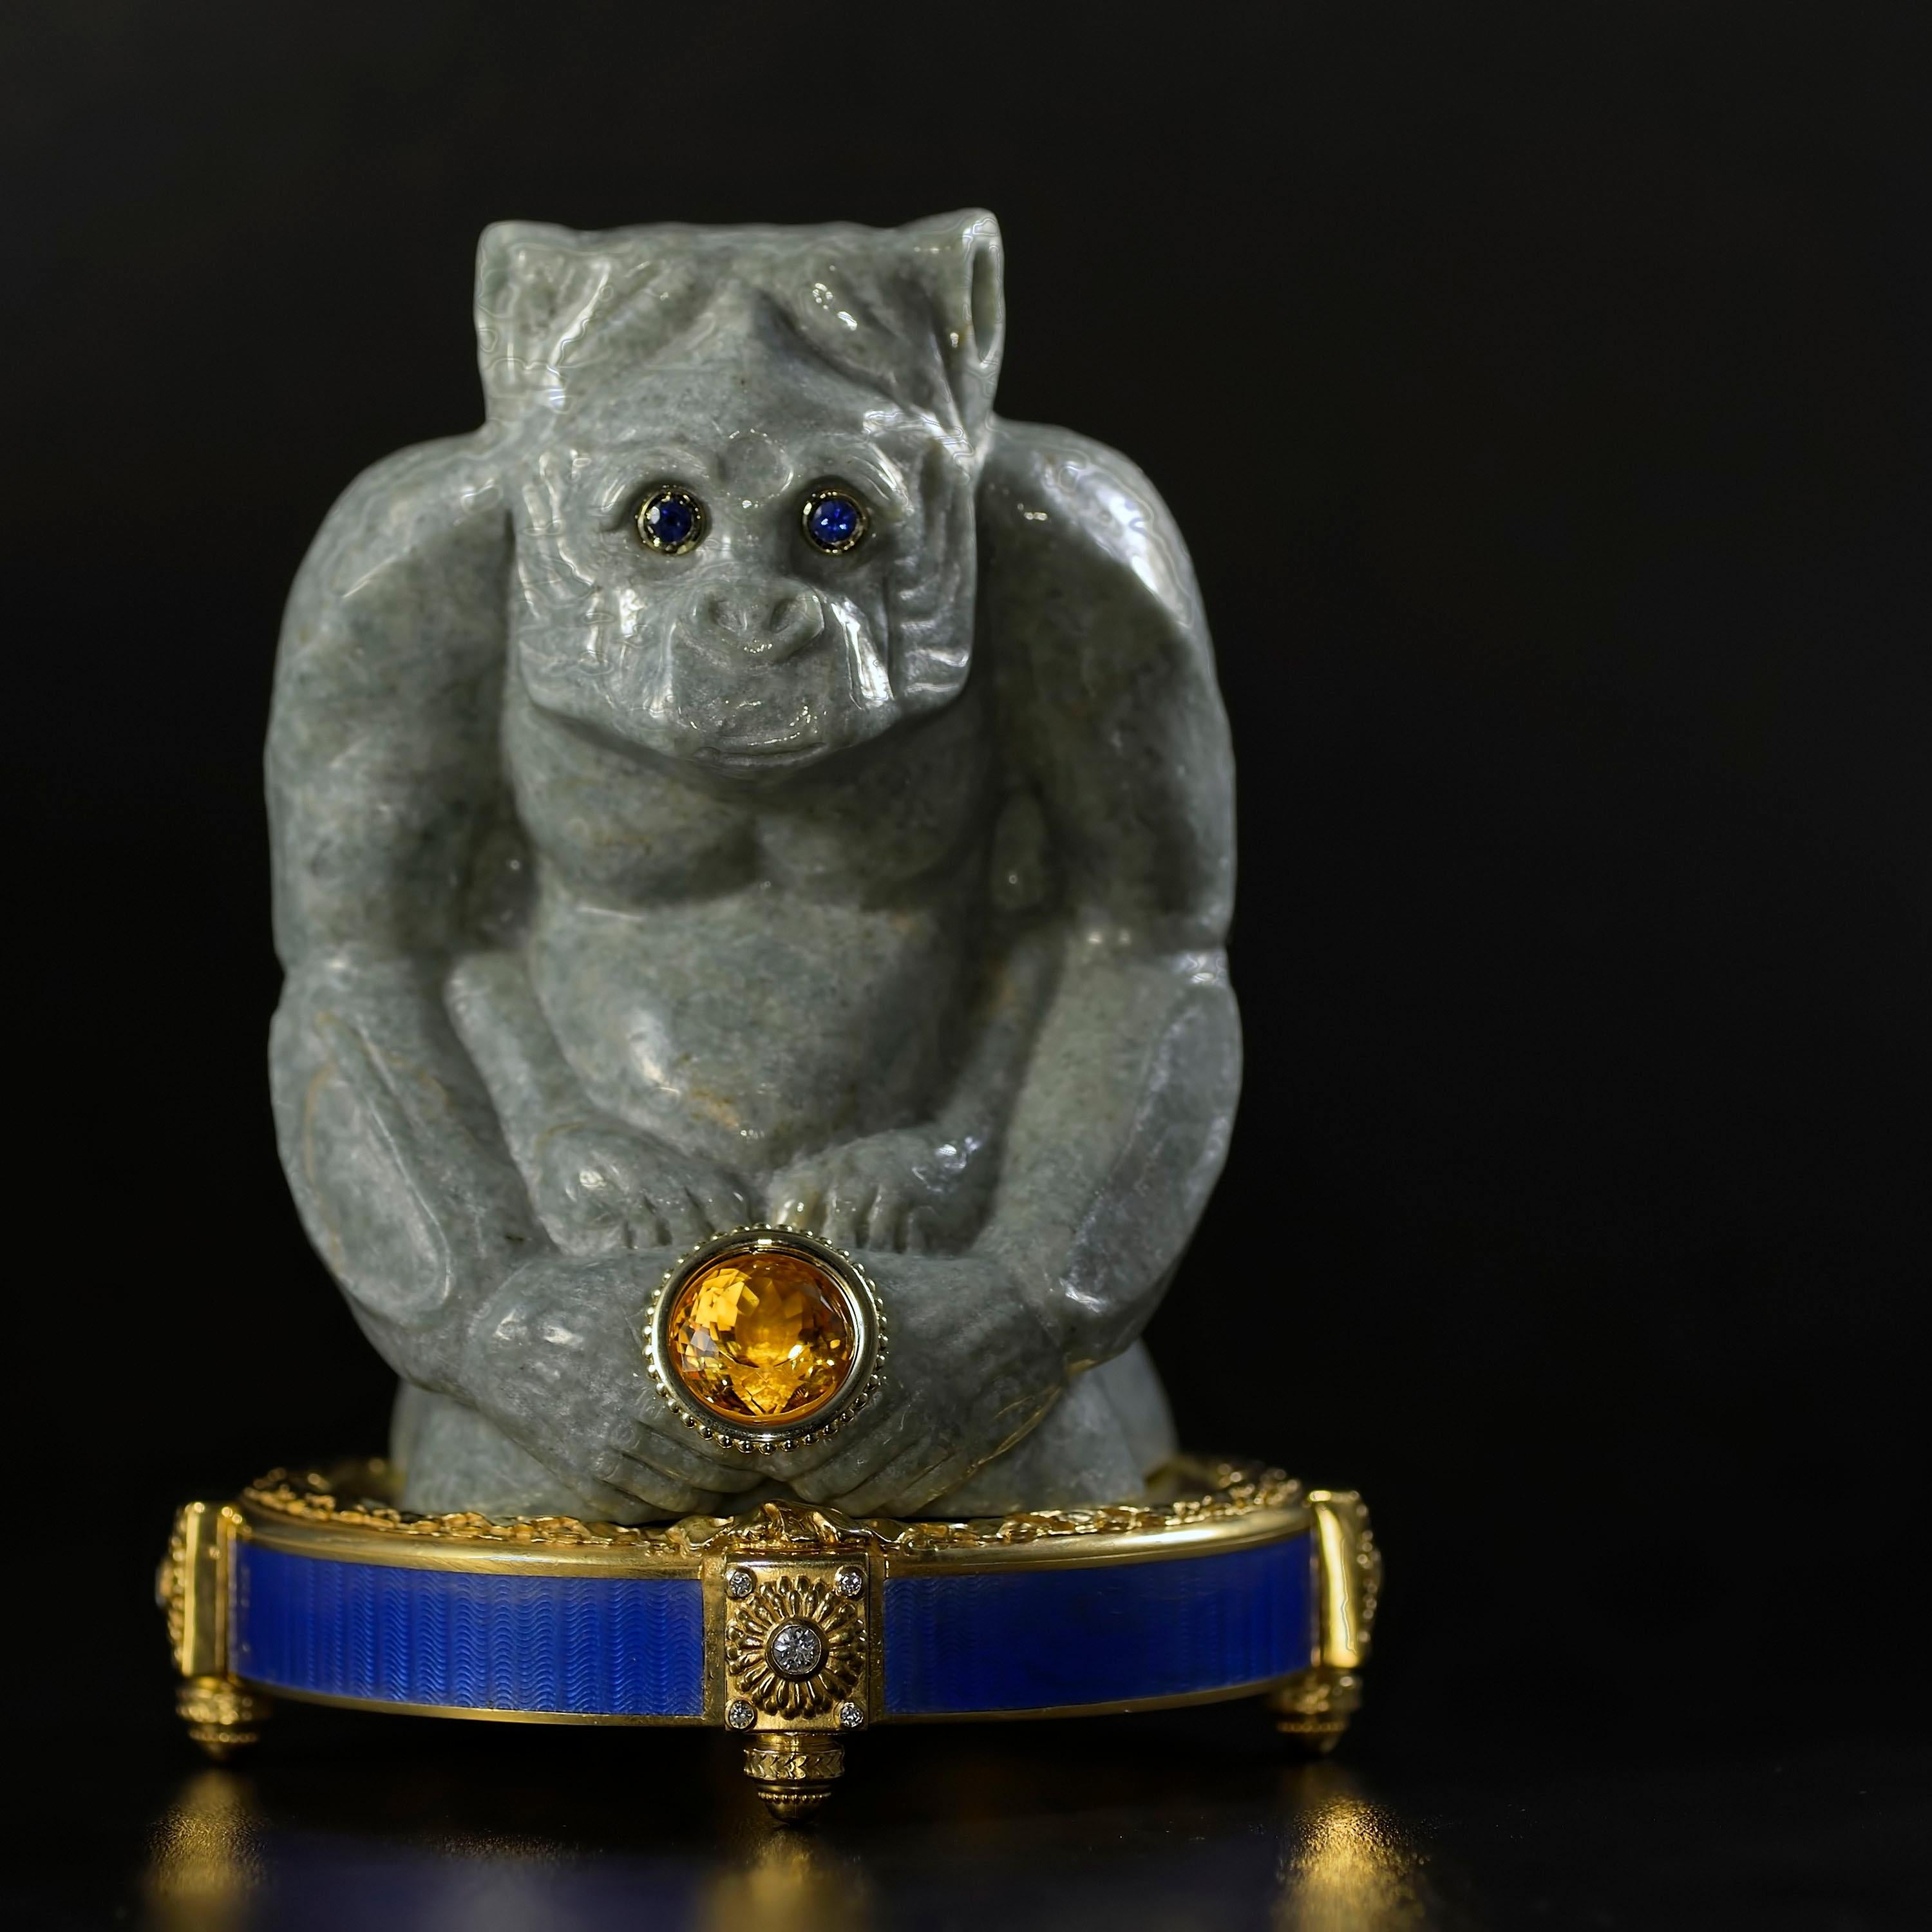 Jade monkey sculpture in Burmese jadeite, eyes set with gold and sapphires, paws holding a gold encased citrine. Pedestal in 24K plated sterling silver, set with diamonds, and covered with blue guilloche enamel.

A wise ape looks on with wonder and